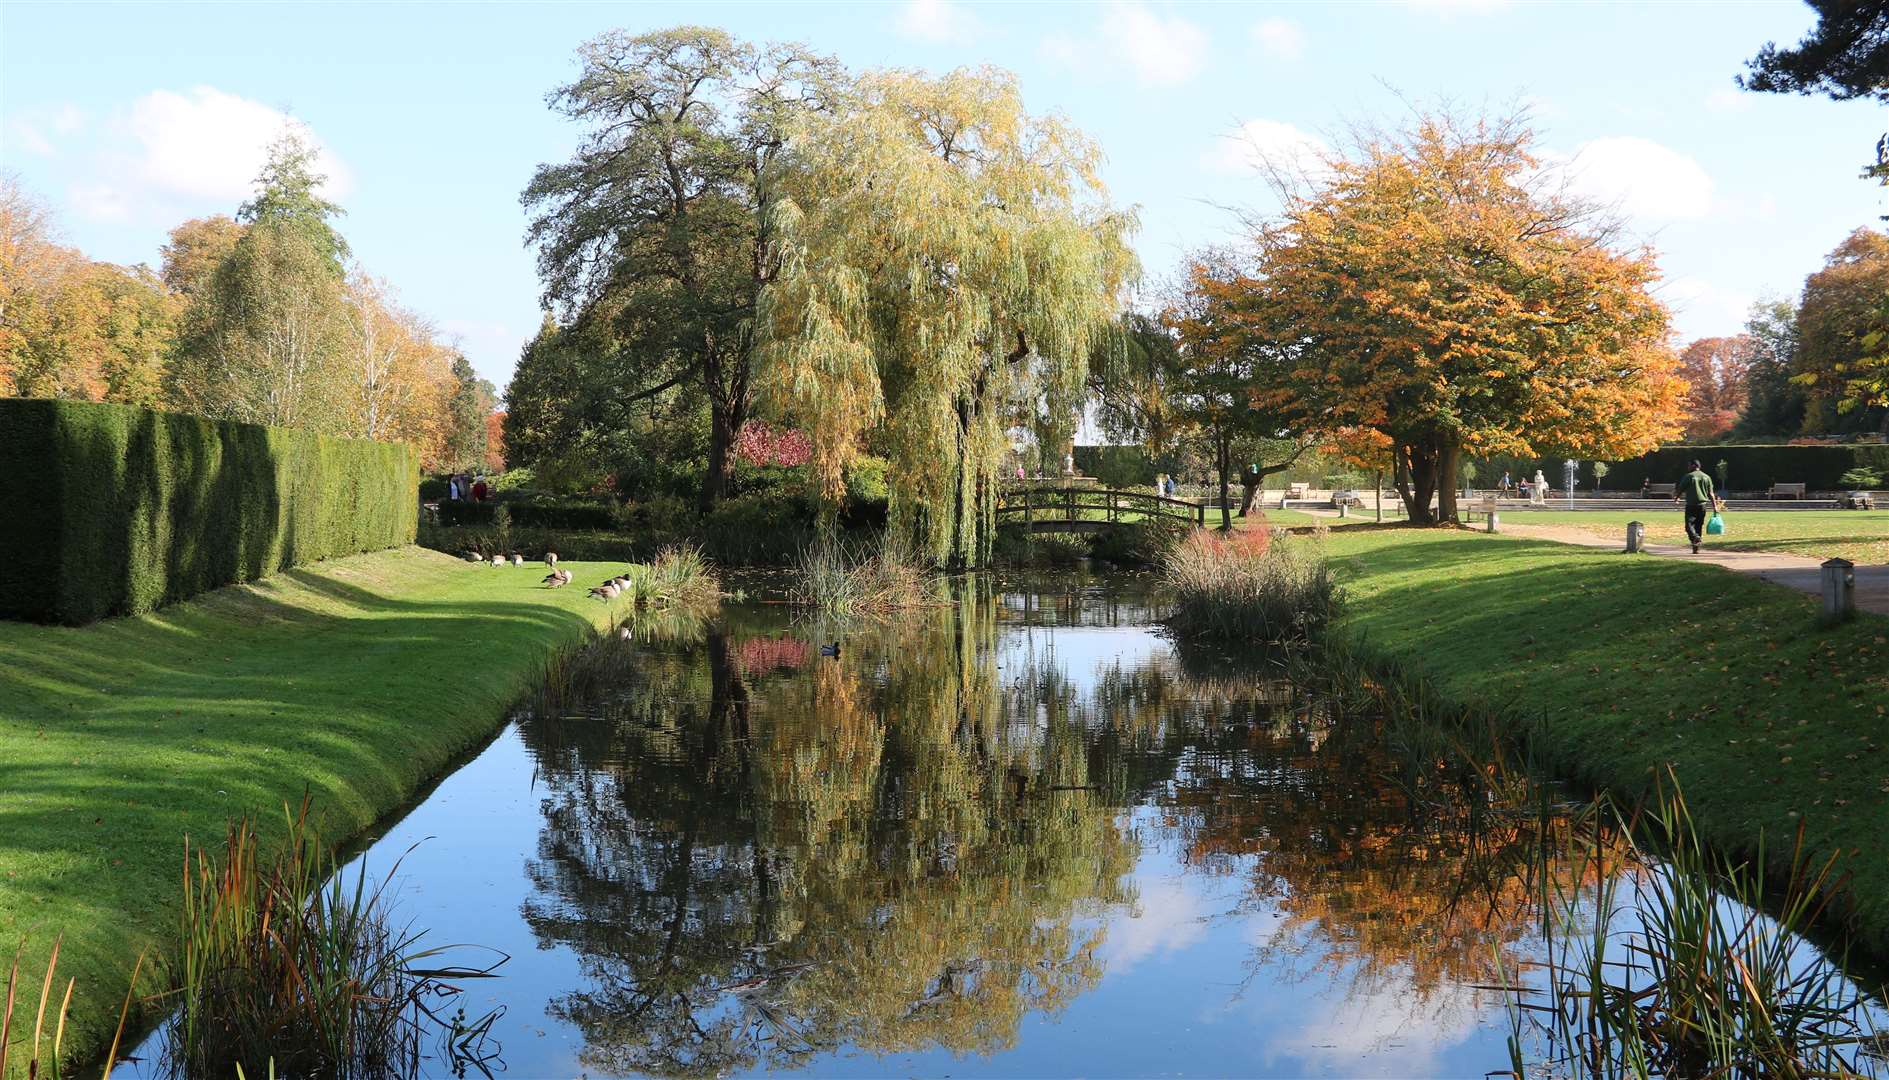 You can 'forest bathe' at Hever Castle and Gardens